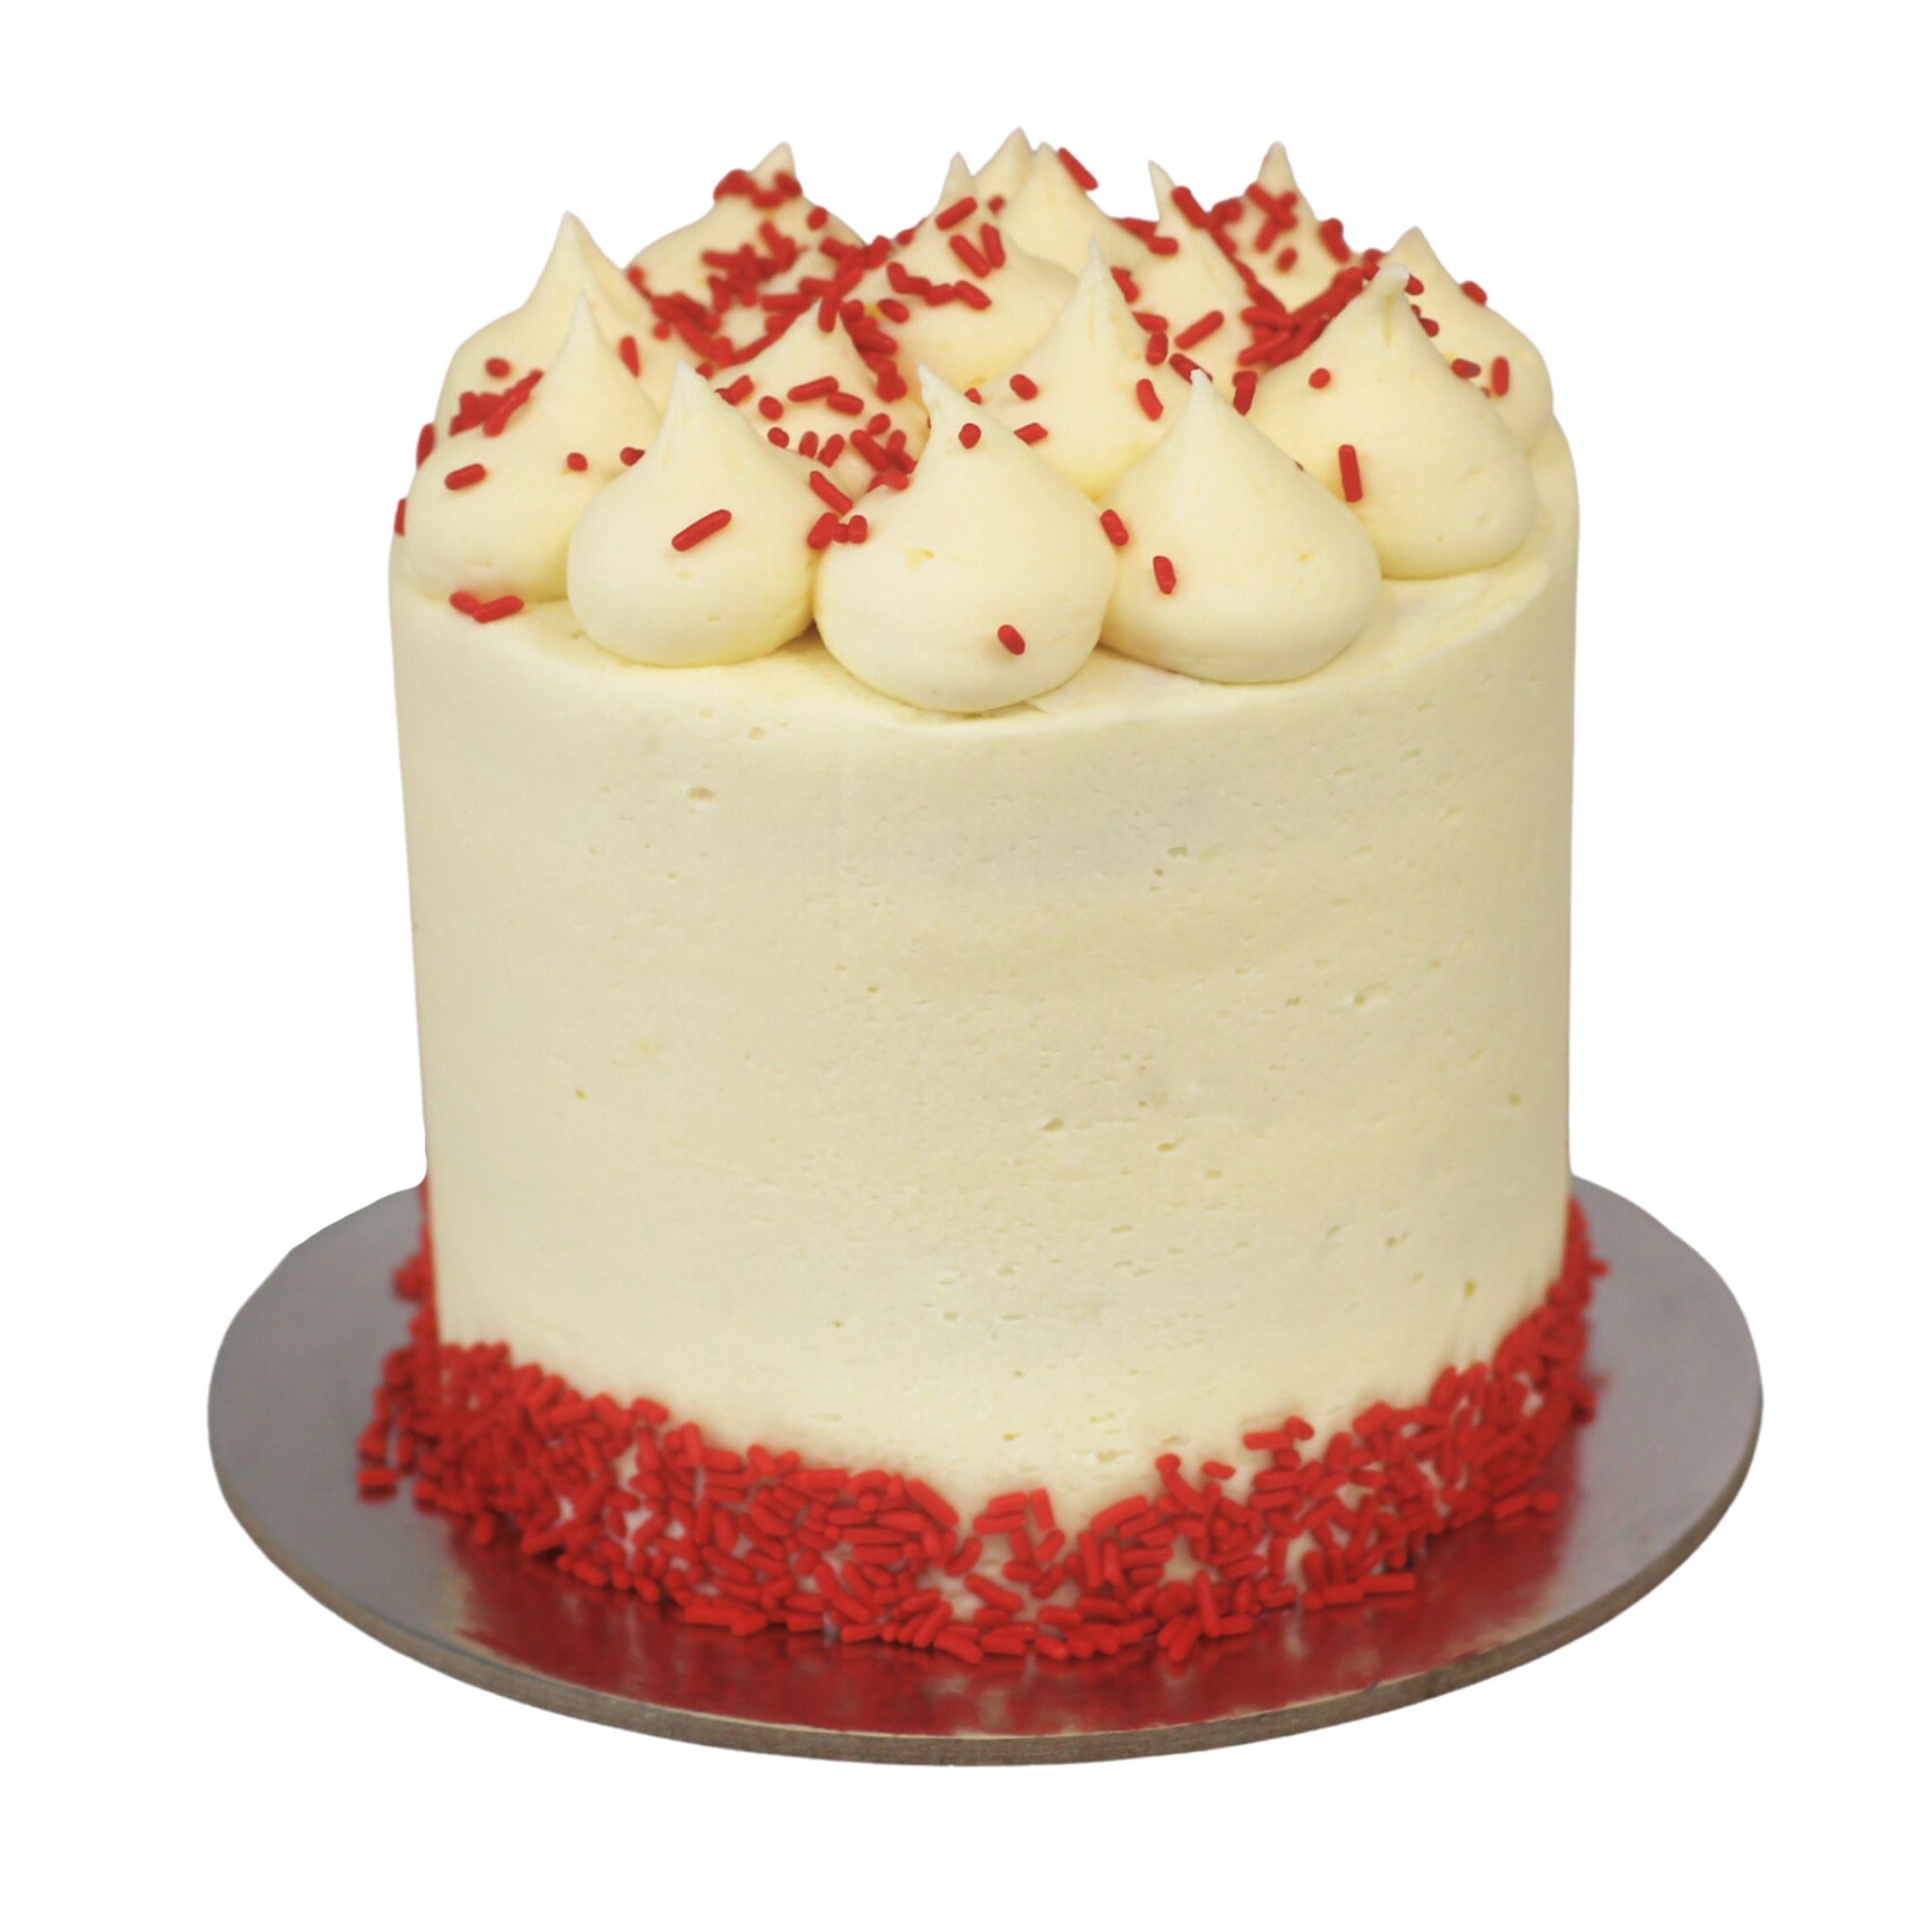 How To Make A Classic Red Velvet Cake For Wedding Anniversary